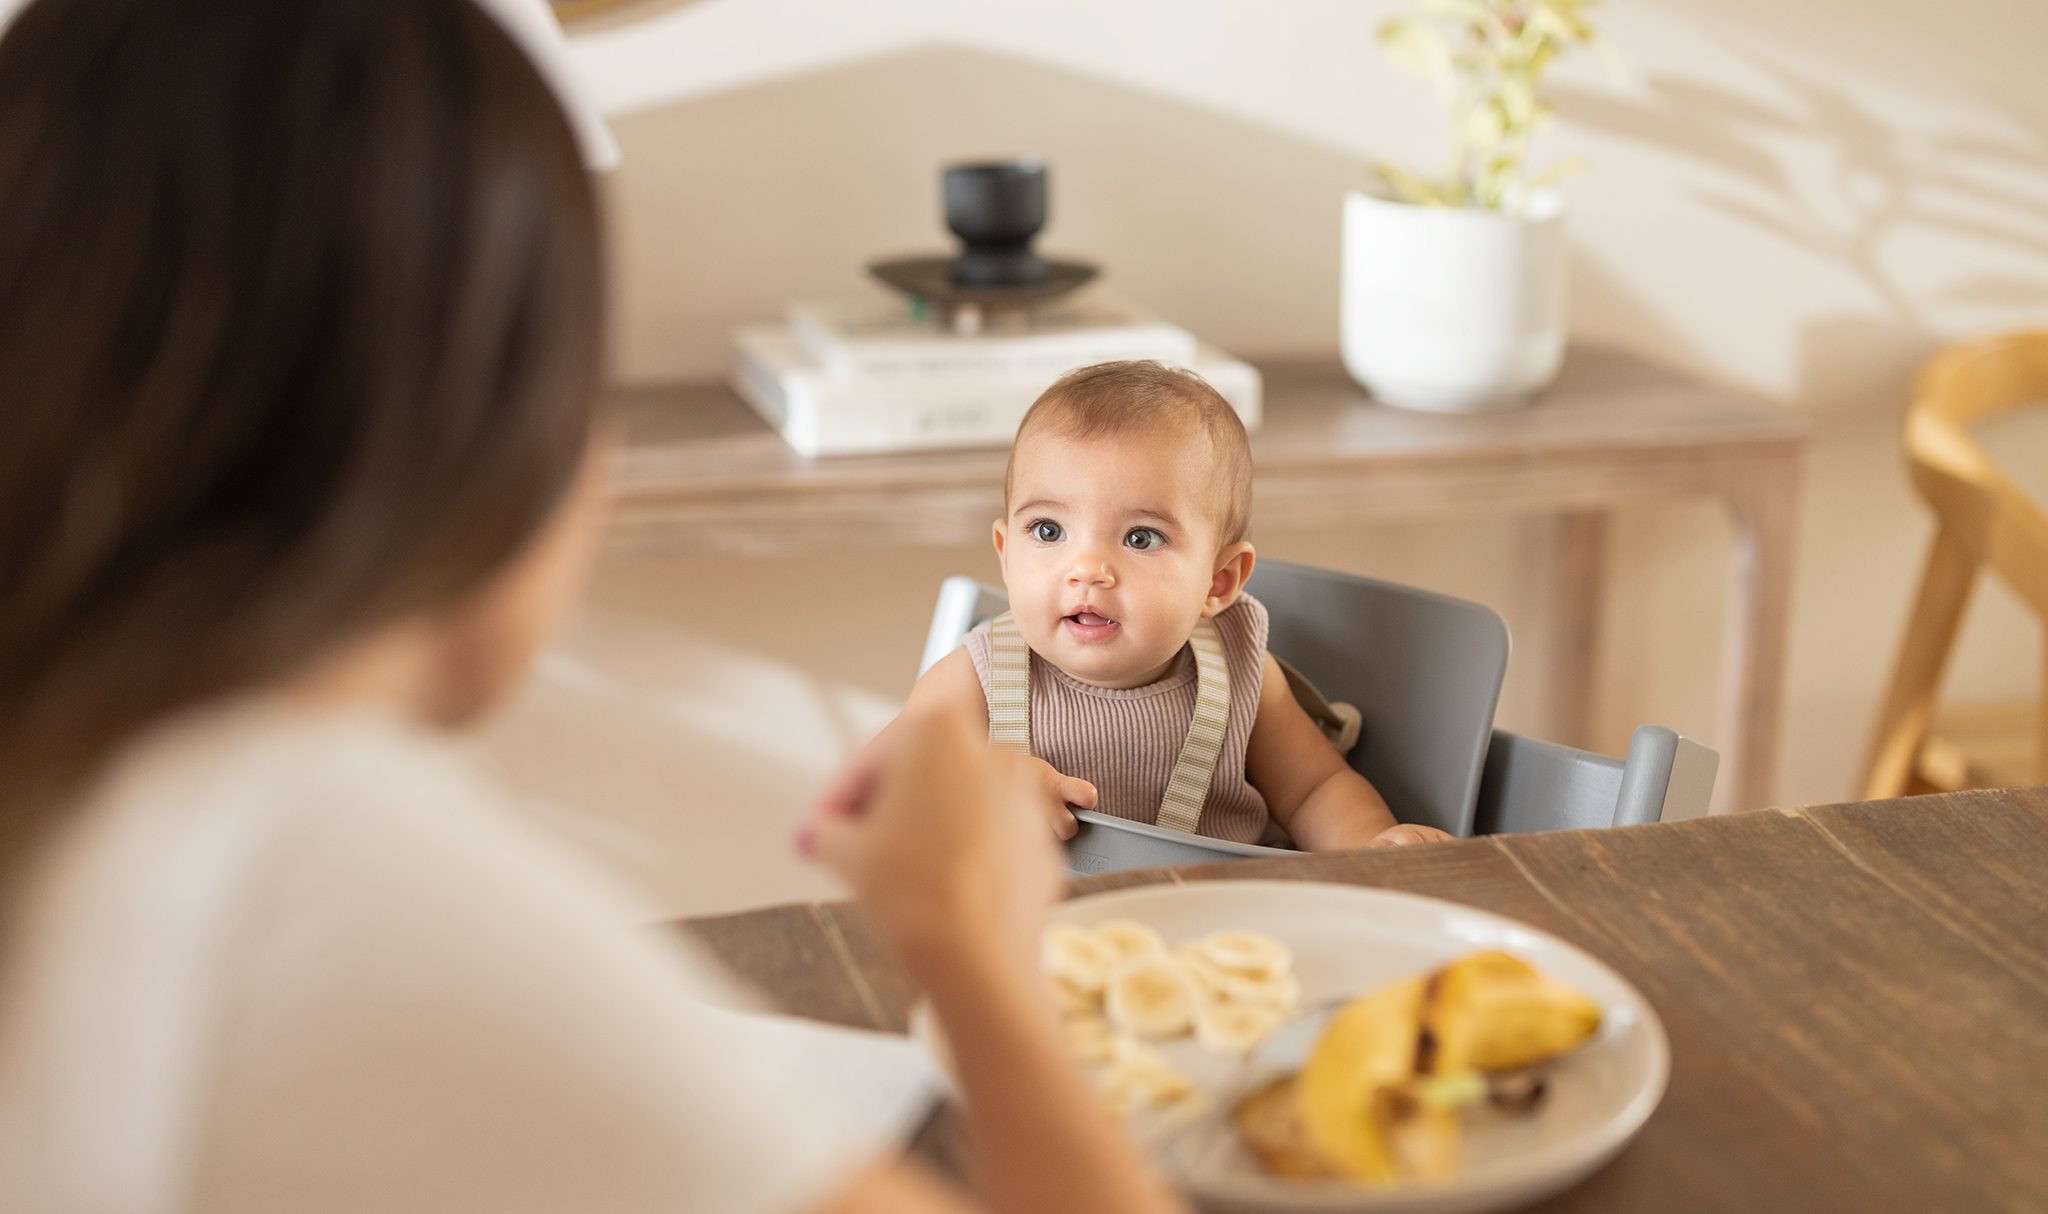 How Much Should Your Baby Eat?